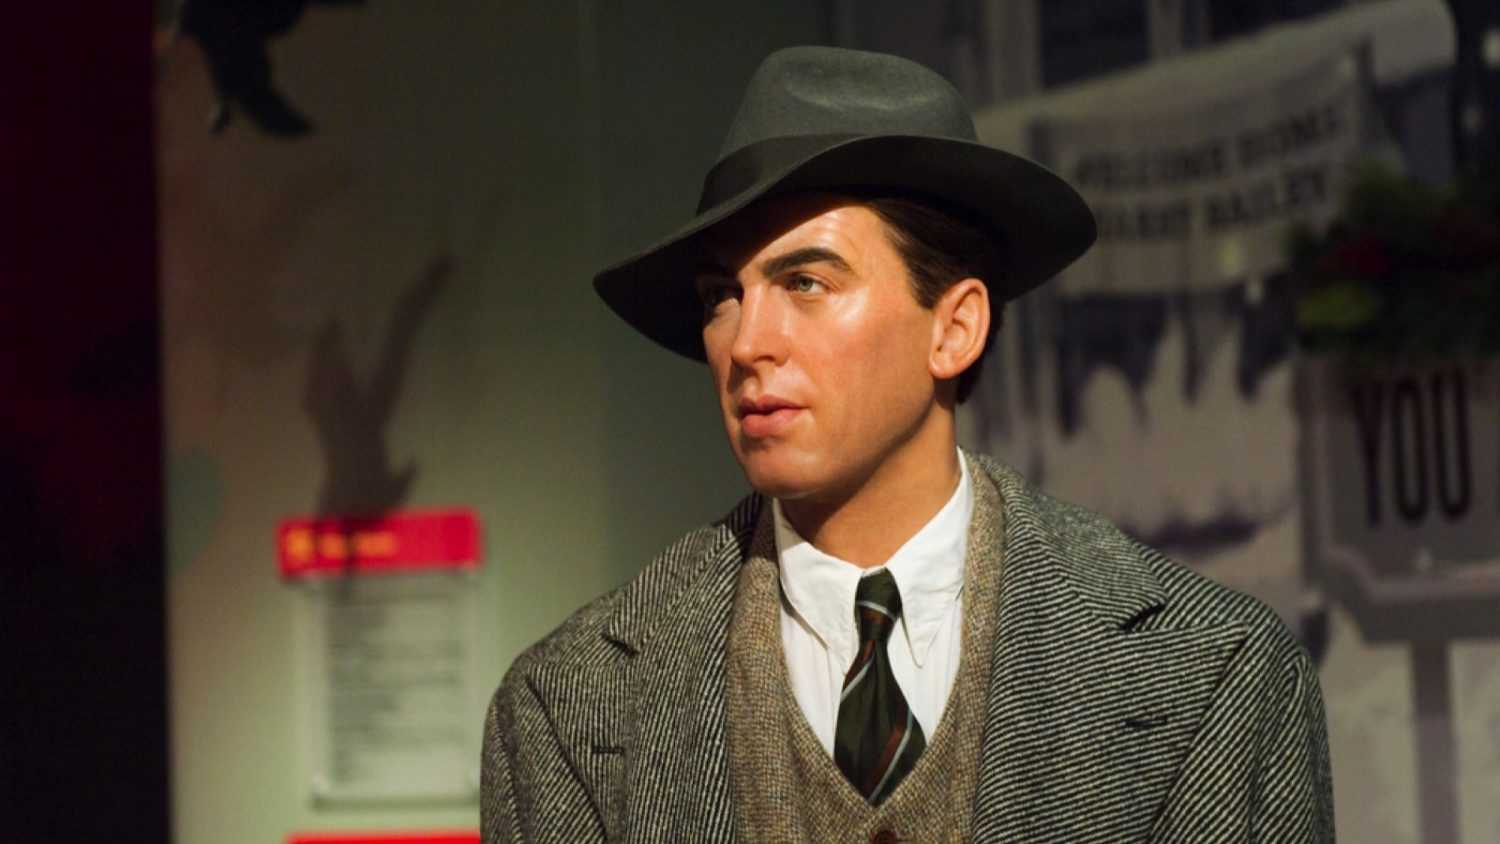 LOS ANGELES, USA - SEP 28, 2015: James Stewart in Madame Tussauds Hollywood wax museum. Marie Tussaud was born as Marie Grosholtz in 1761